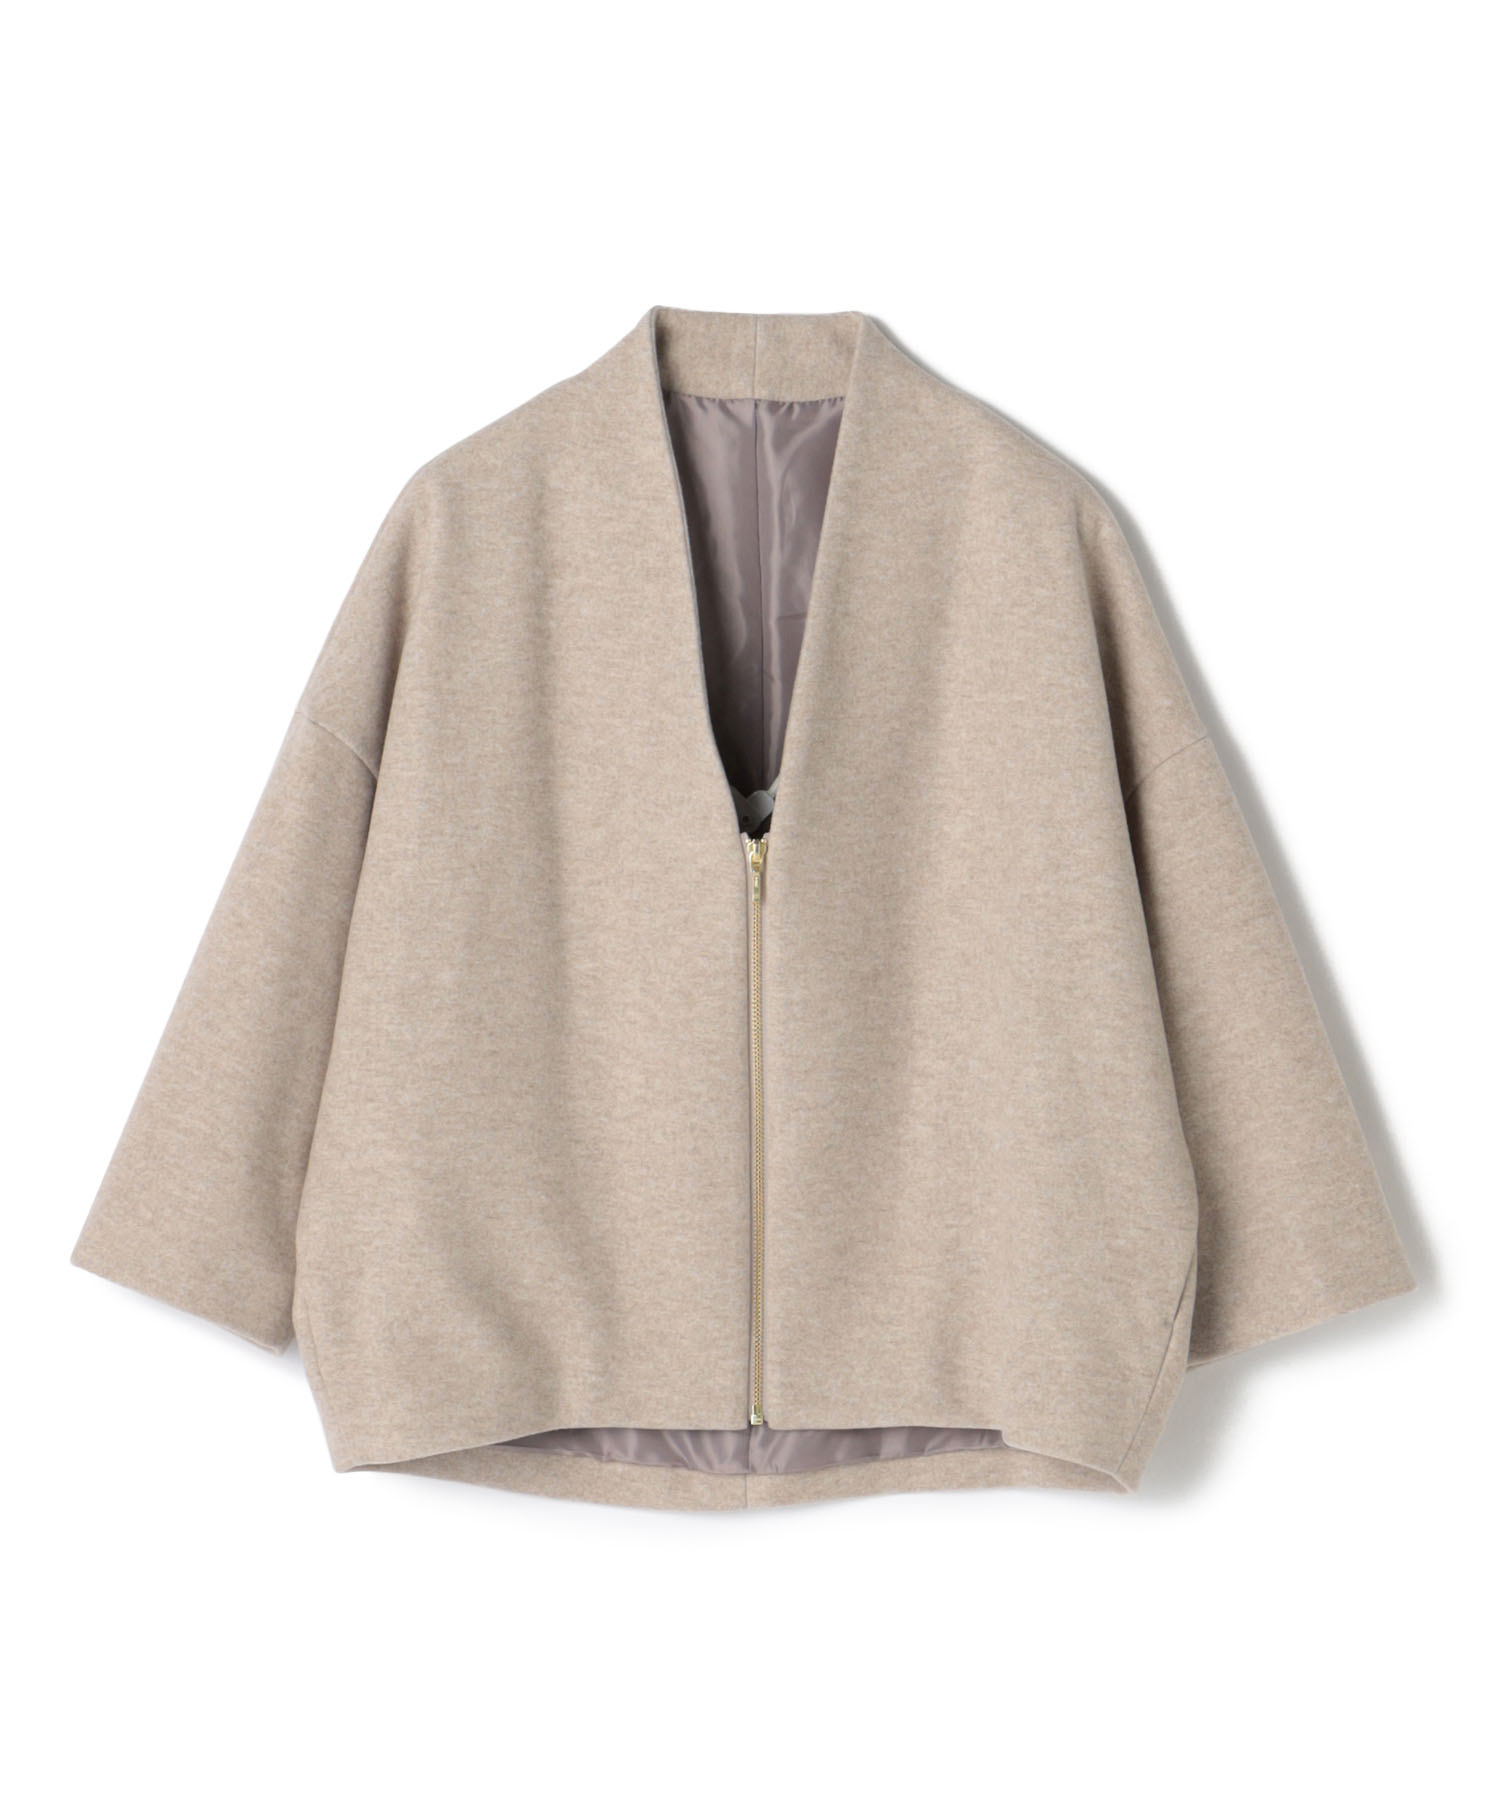 ReNorm by A.T<br>ソフト起毛ジャケット<br>￥17,050 tax in